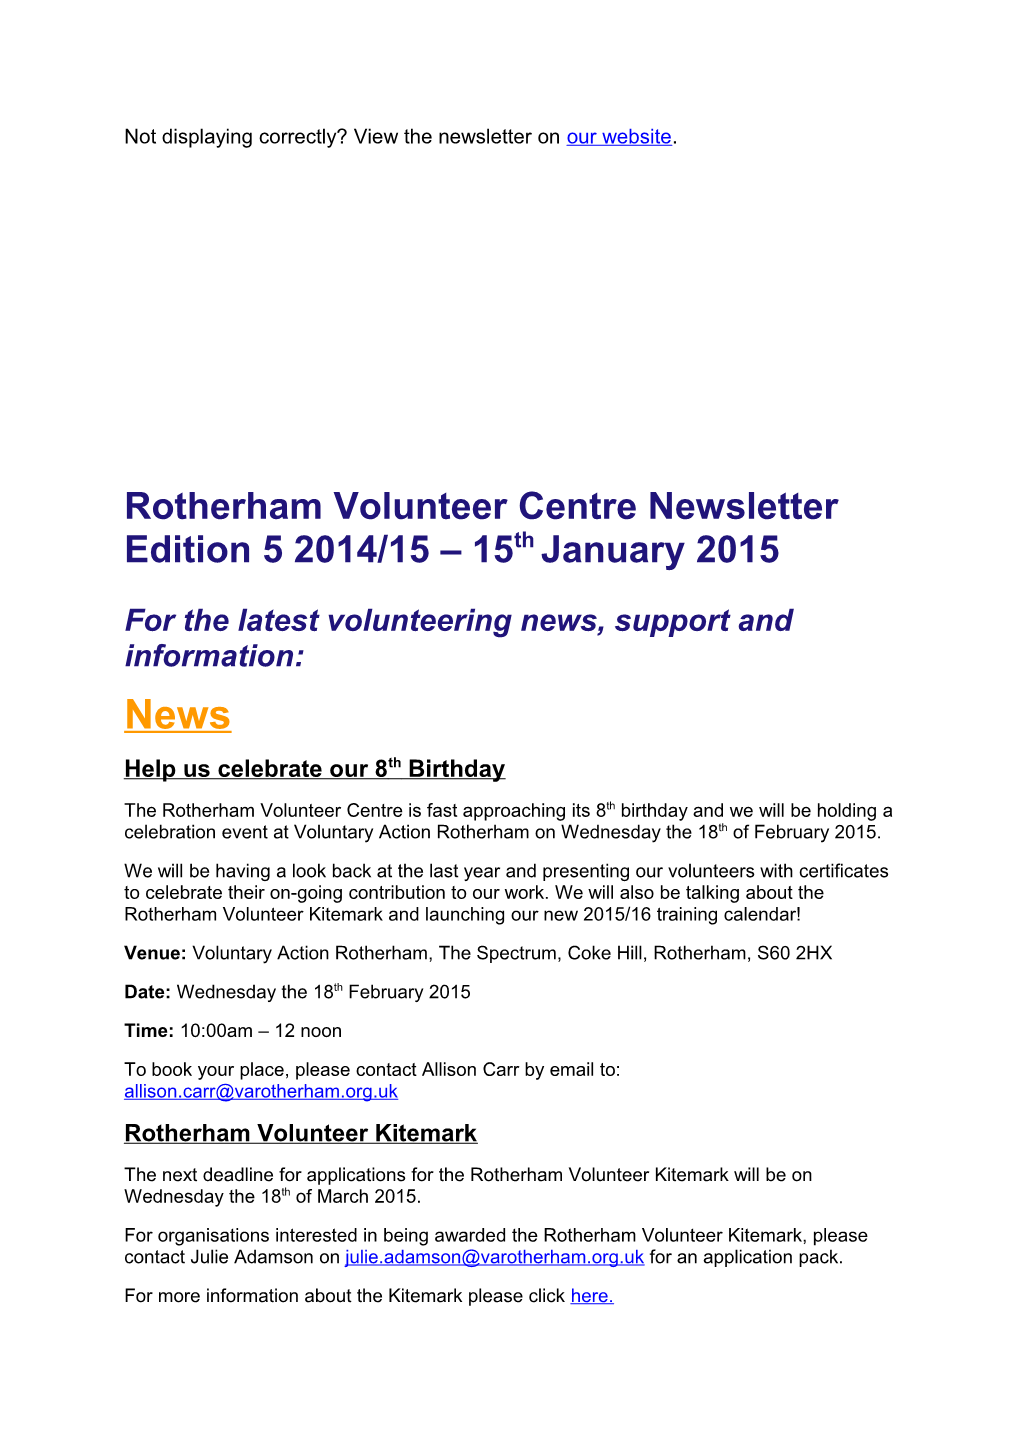 For the Latest Volunteering News, Support and Information